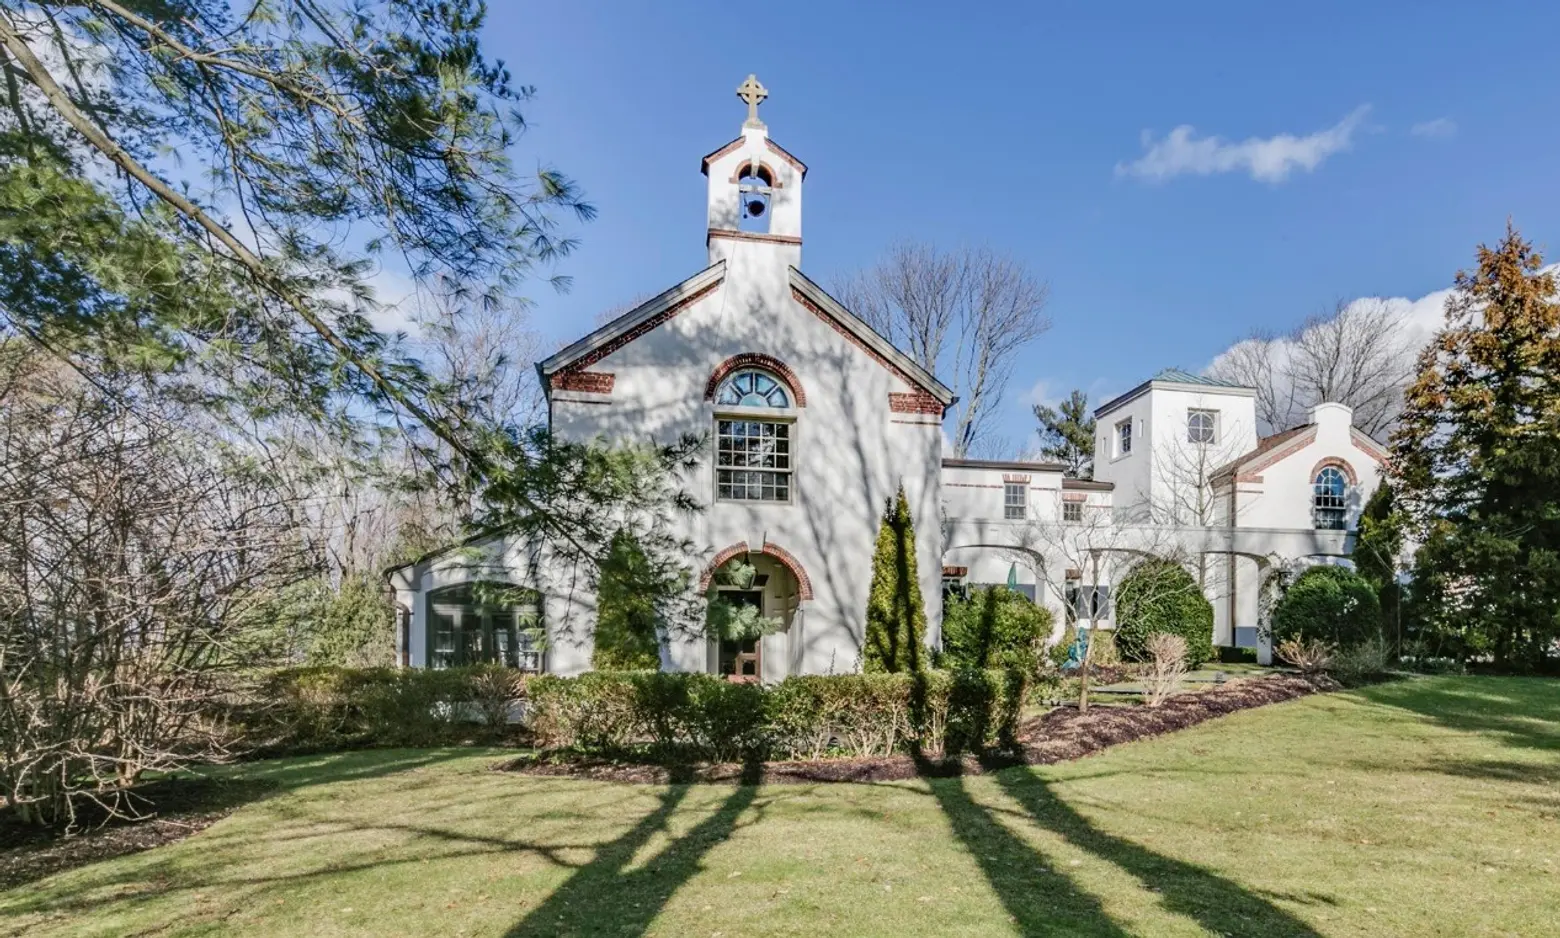 Stanford White-designed chapel, once part of the Edwin D. Morgan estate, is now a home asking $3.25M